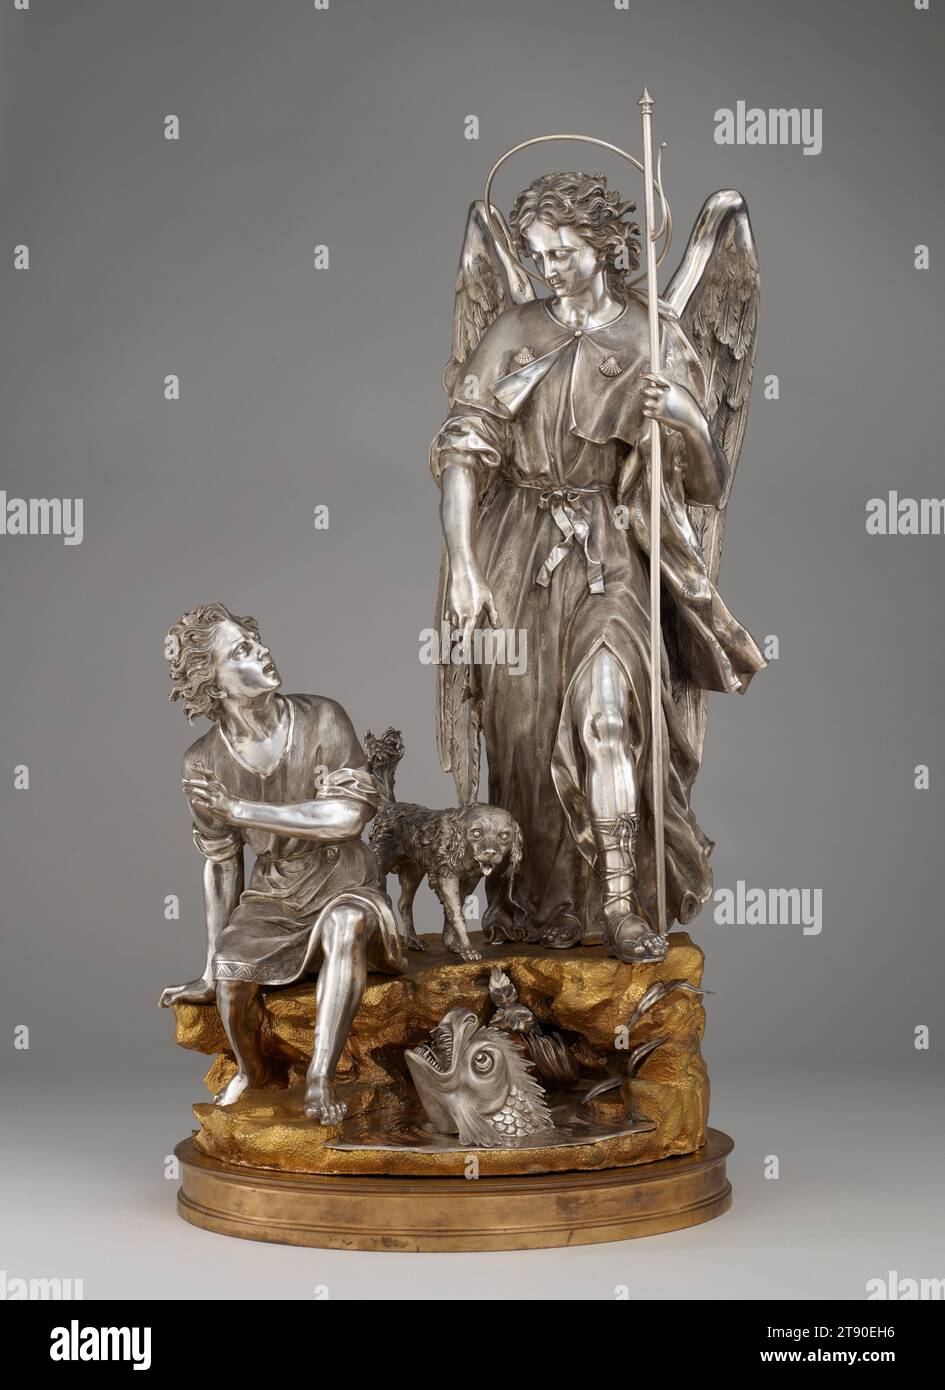 Saint Raphael with Tobias, His Dog, and the Fish, c. 1780, Giuseppe Sanmartino, Italian, 1720–1793, 27 1/4 × 17 1/4 × 12 1/2 in. (69.22 × 43.82 × 31.75 cm), Silver, gilt bronze, Italy, 18th century, Tobias, a young Jewish man, has been sent by his blind father to retrieve money left with a relative. Accompanying him on the journey are his dog and a hired guide who, unbeknownst to him, is the archangel Raphael. When they reach the Tigris River, Tobias is attacked by a monstrous fish. Raphael tells him to catch it and preserve its innards as medicines. Stock Photo